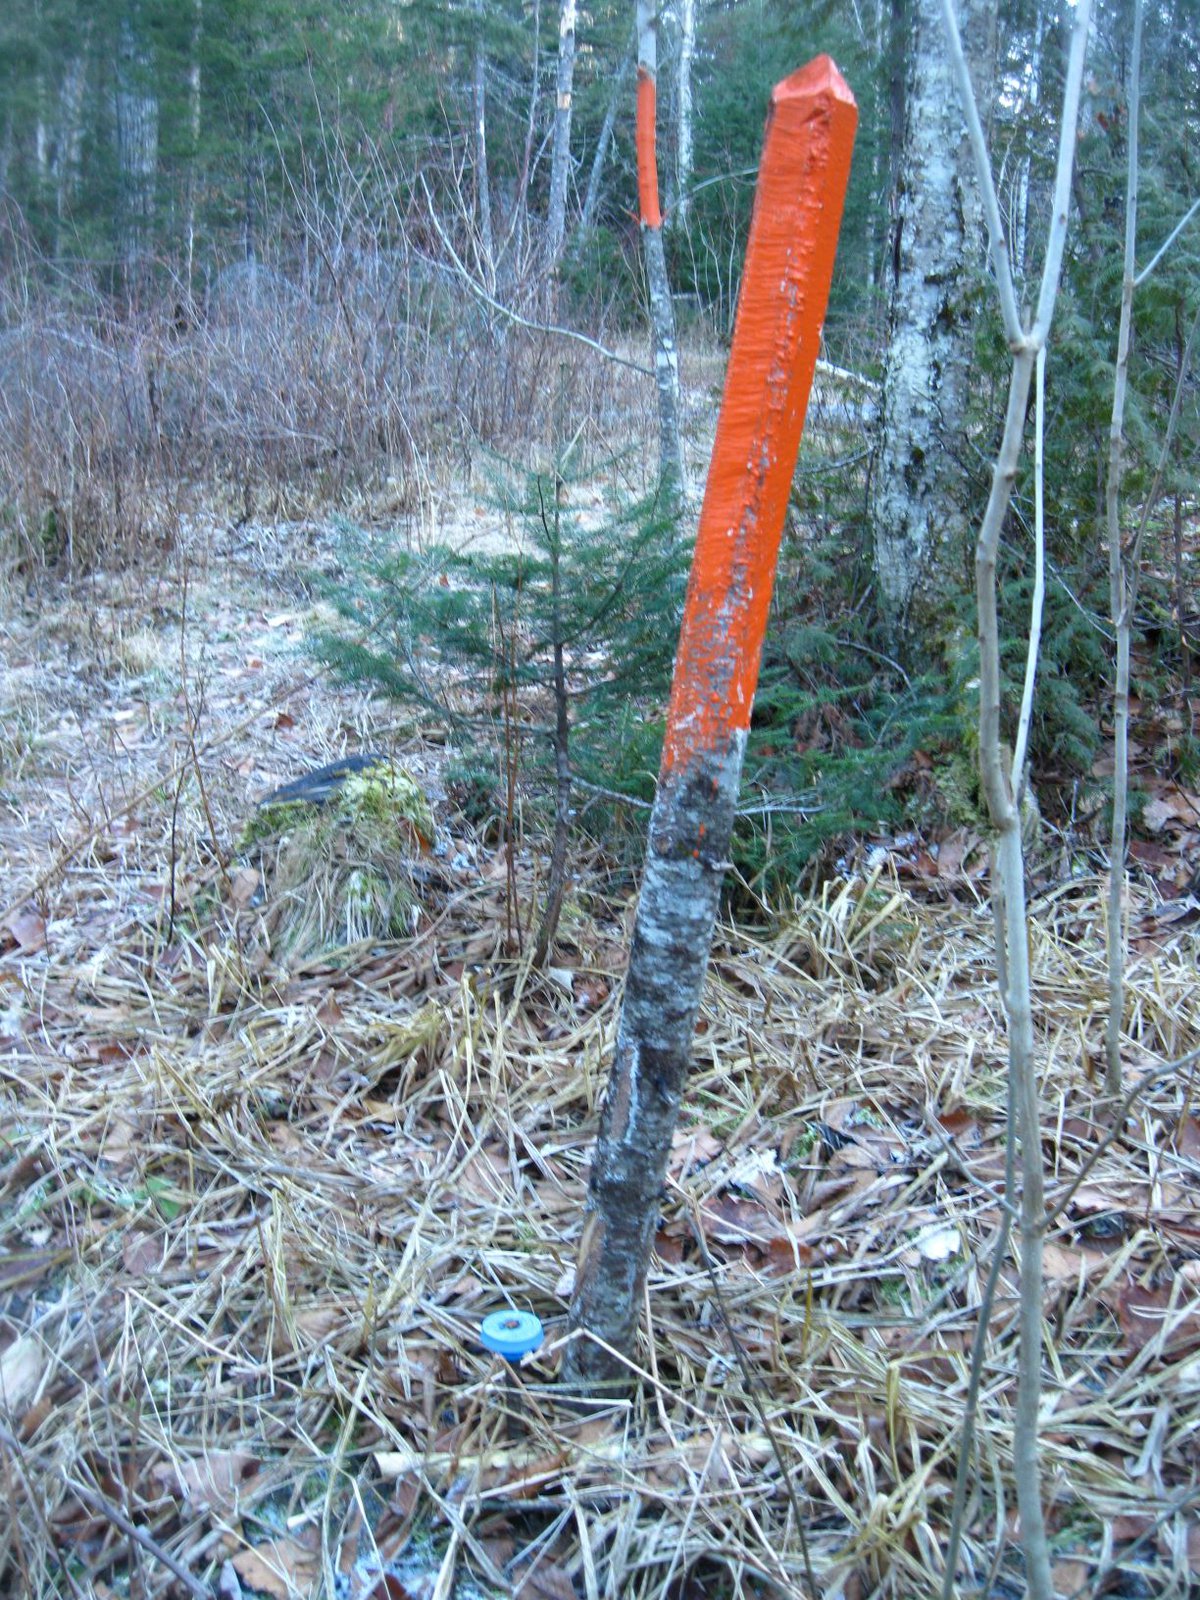 Surveying boundary lines: This be yours and this be mine but where oh where  betwixt is the line? - Small Farm Canada